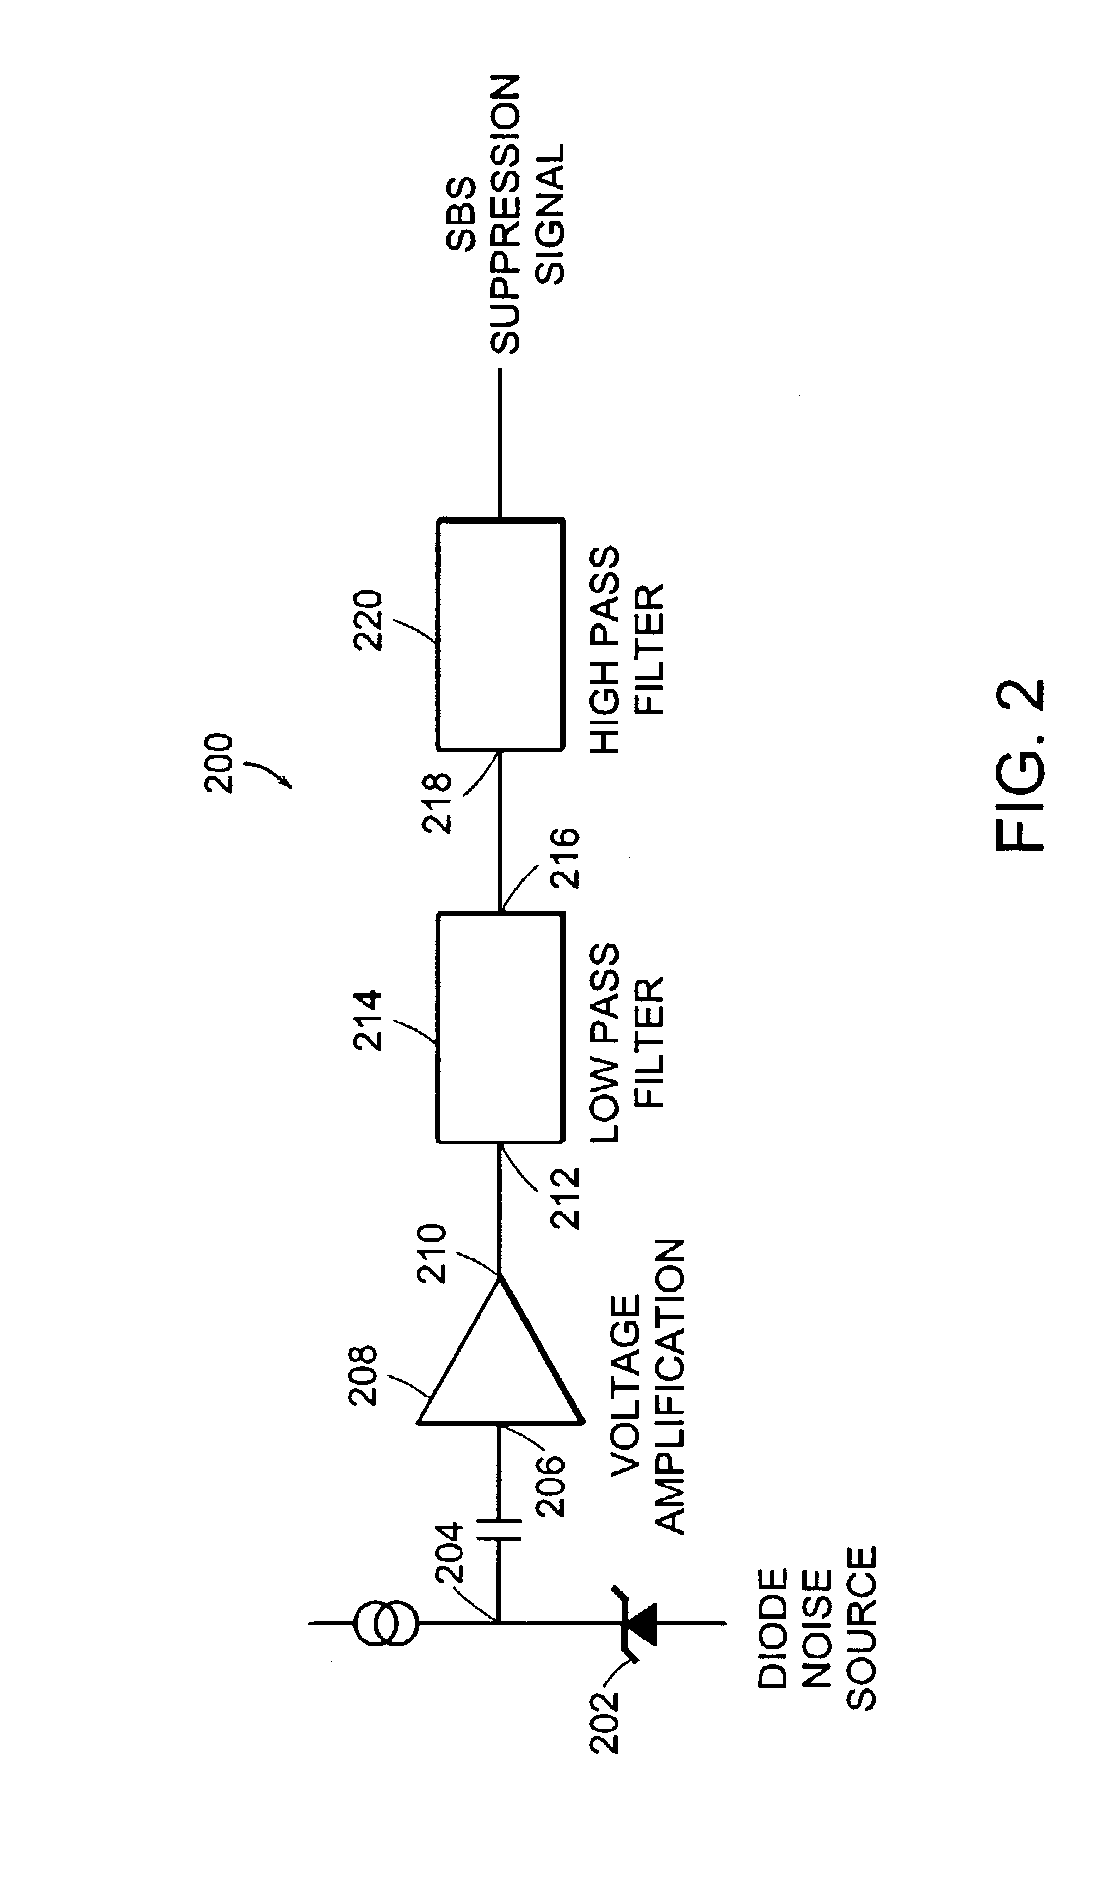 Optical transmitter with SBS suppression